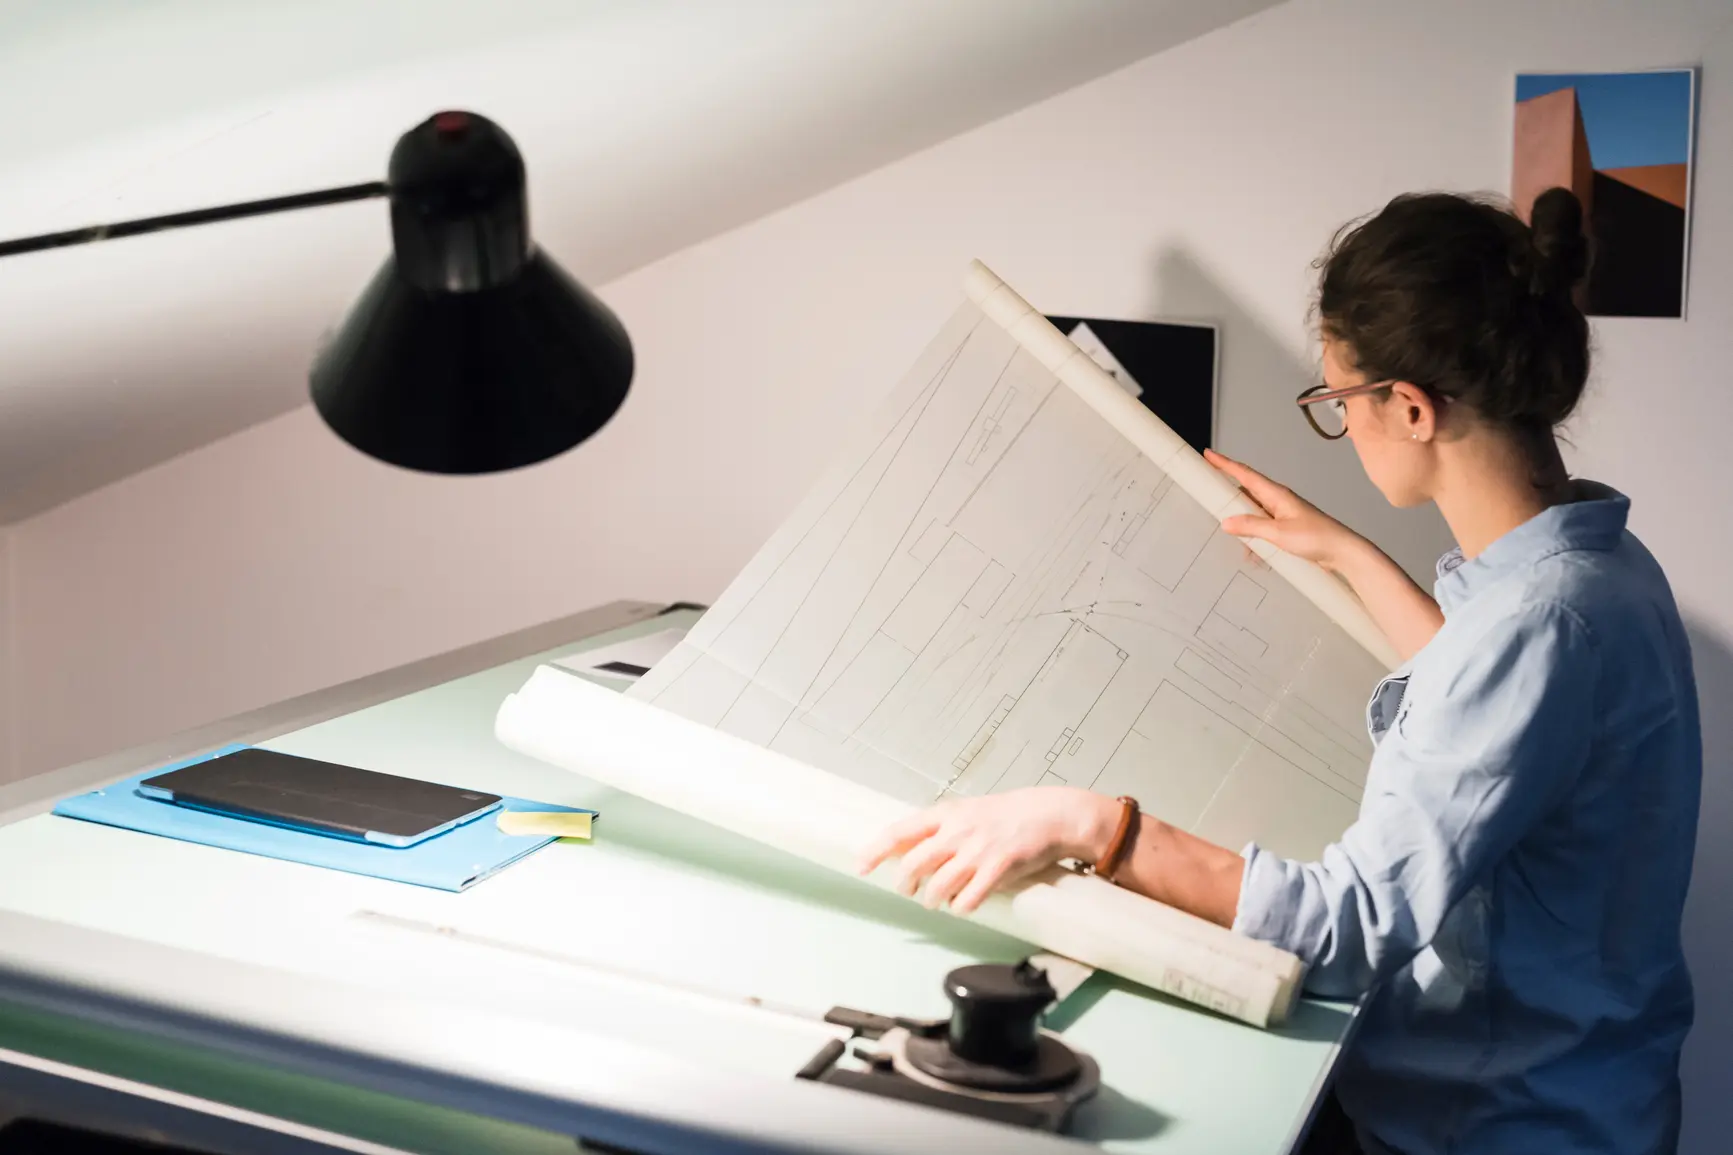 An architect sits at her desk and unrolls a large blueprint in front of her.